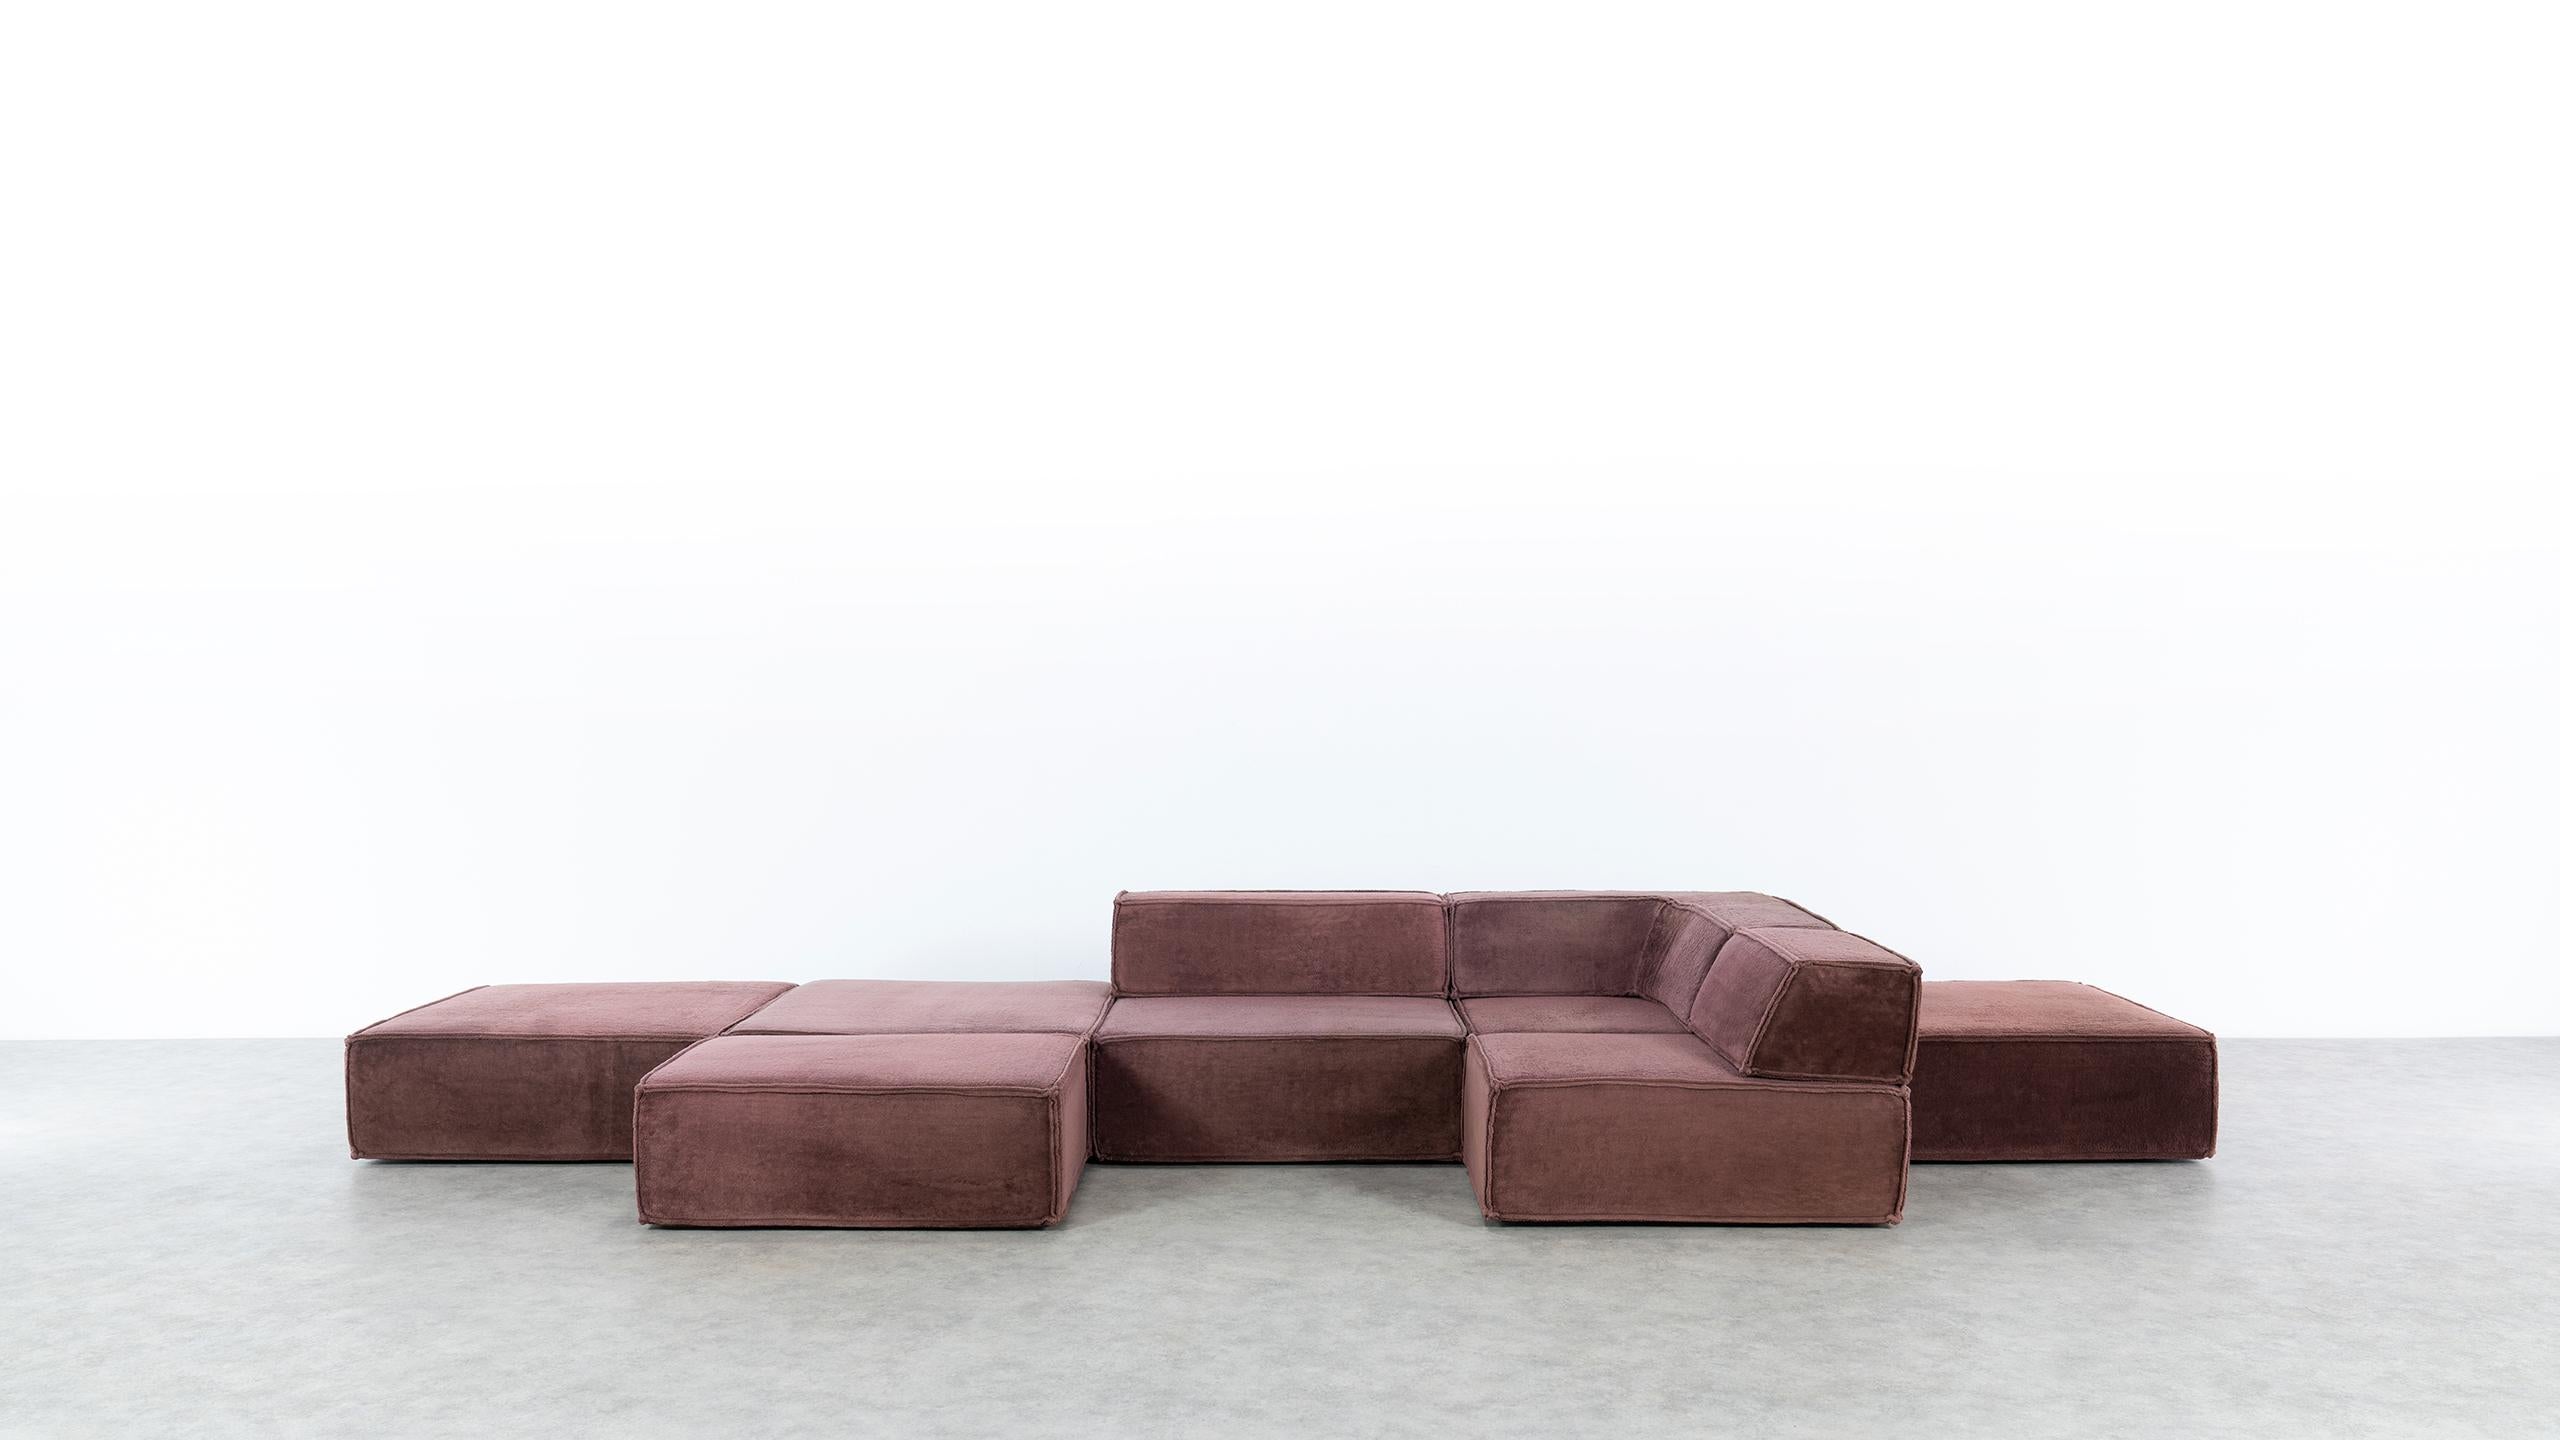 COR Trio Modular Sofa, Giant Landscape in Brown, 1972 by Team Form AG, Swiss 5